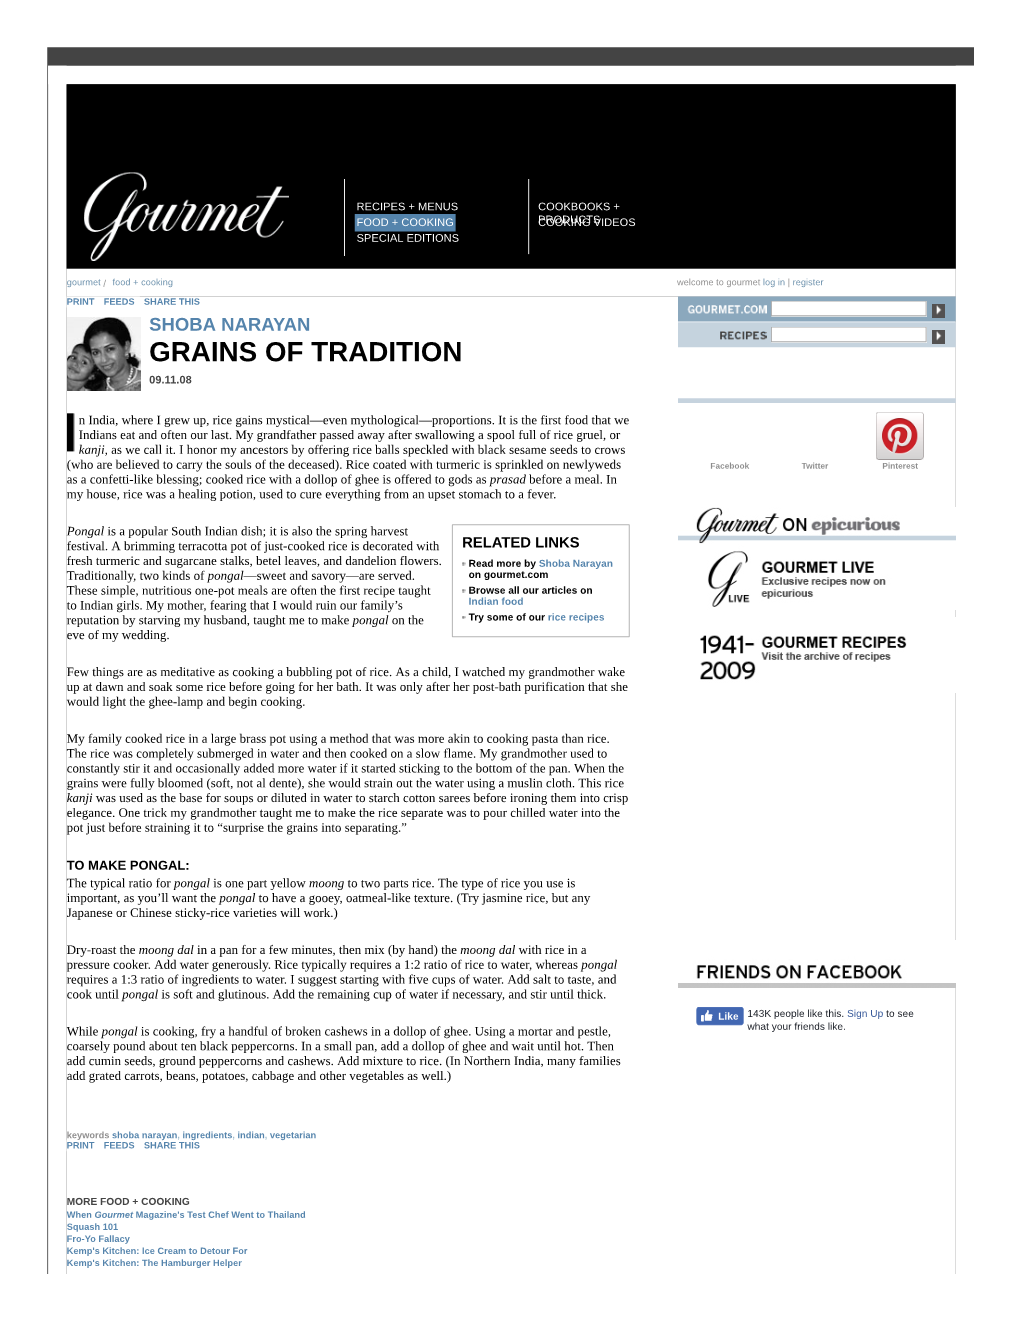 Grains of Tradition PDF Here